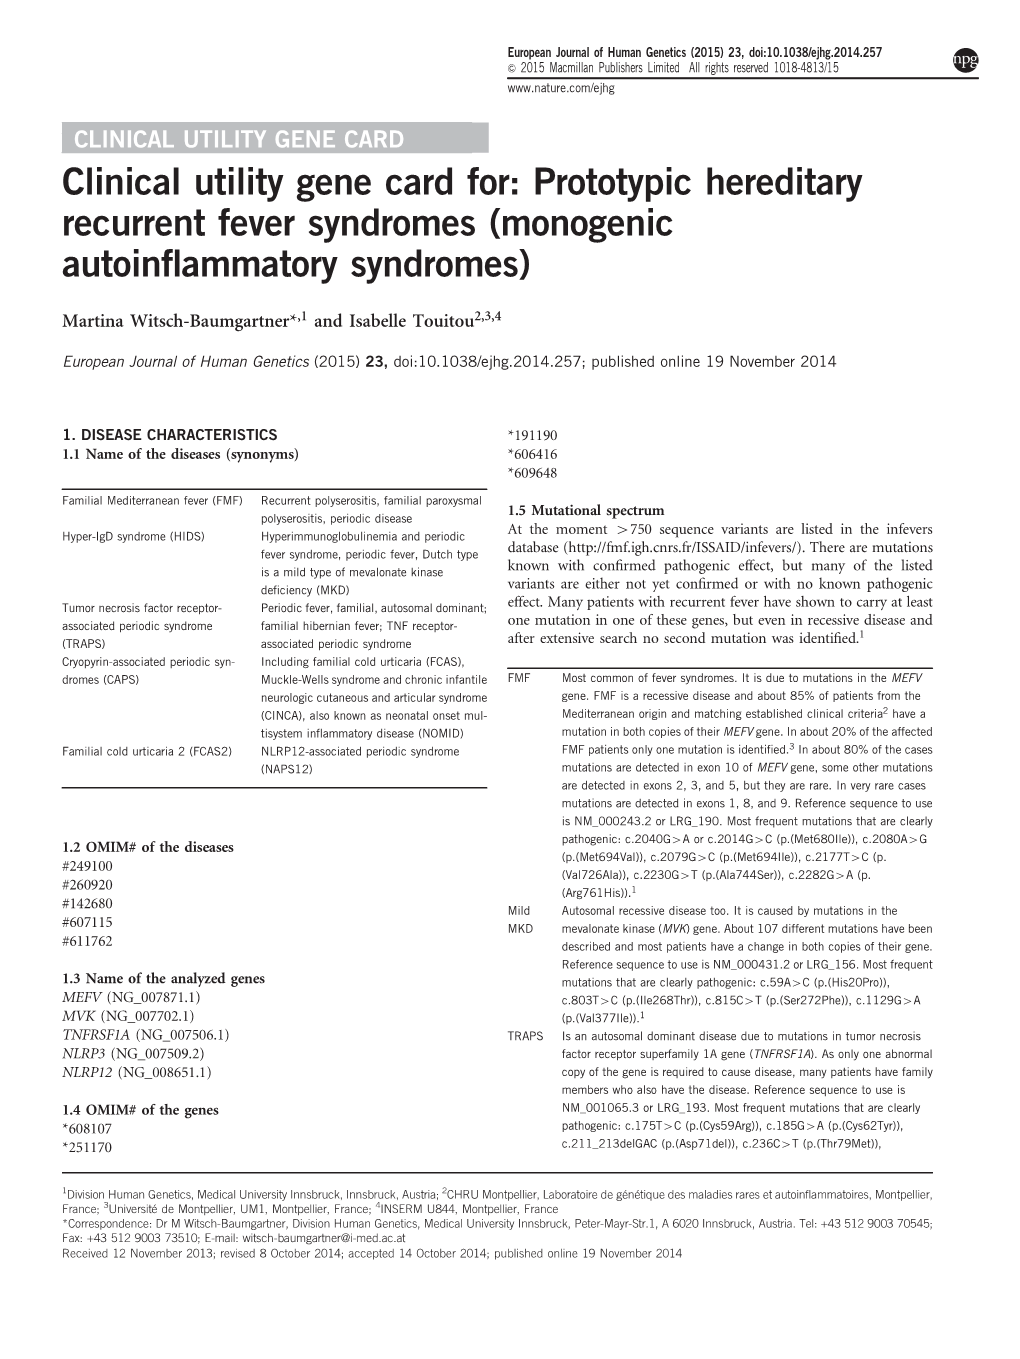 Clinical Utility Gene Card For: Prototypic Hereditary Recurrent Fever Syndromes (Monogenic Autoinﬂammatory Syndromes)